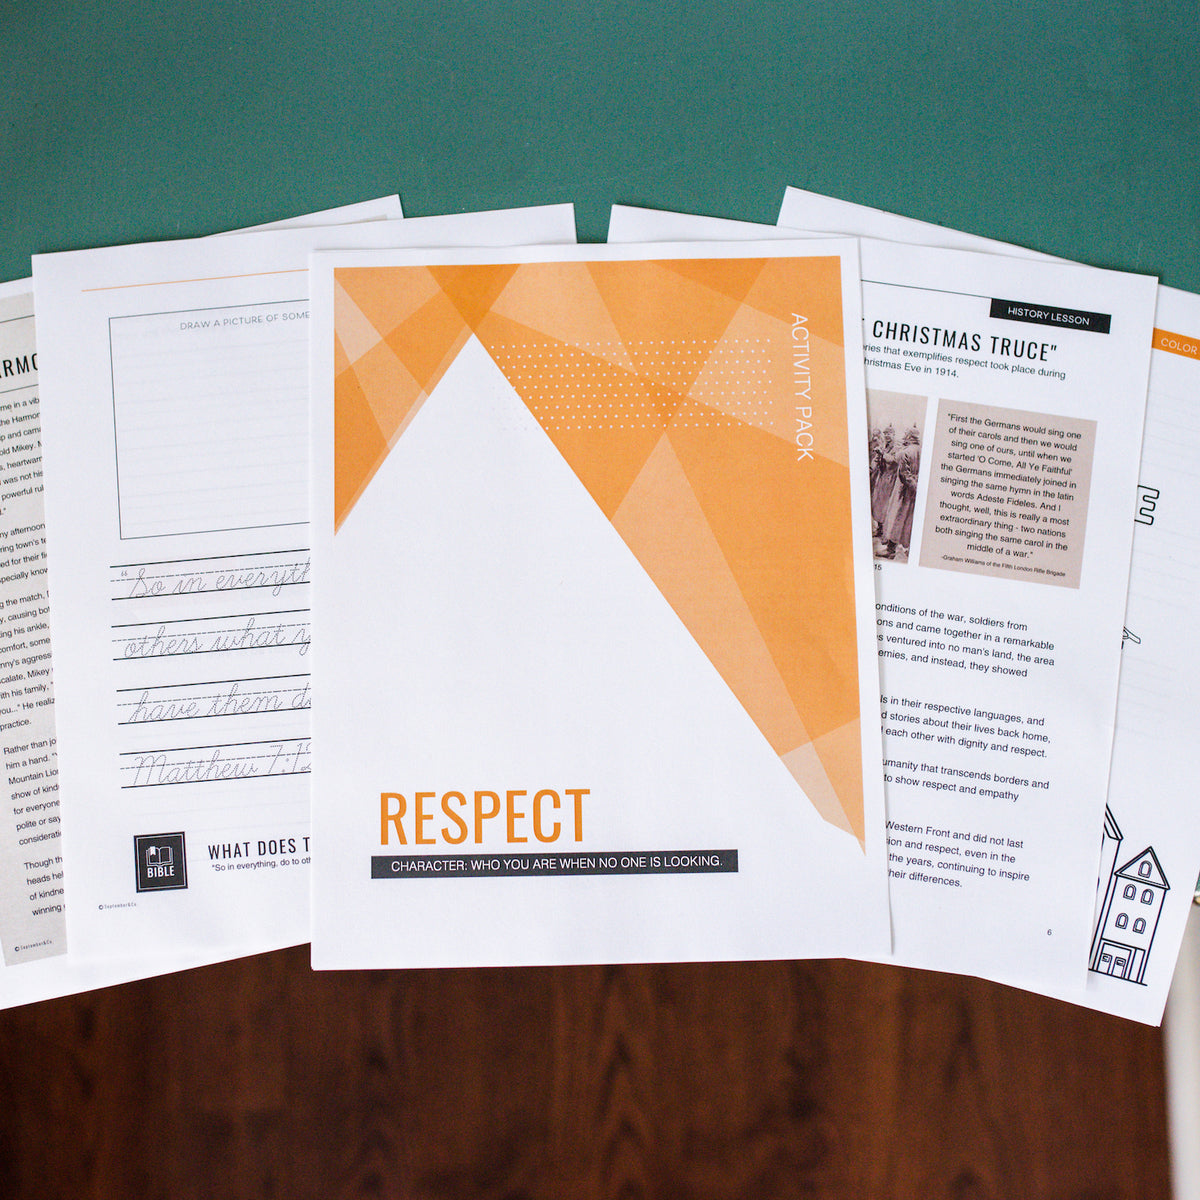 Youth Character Activity Pack - Respect (DOWNLOAD)